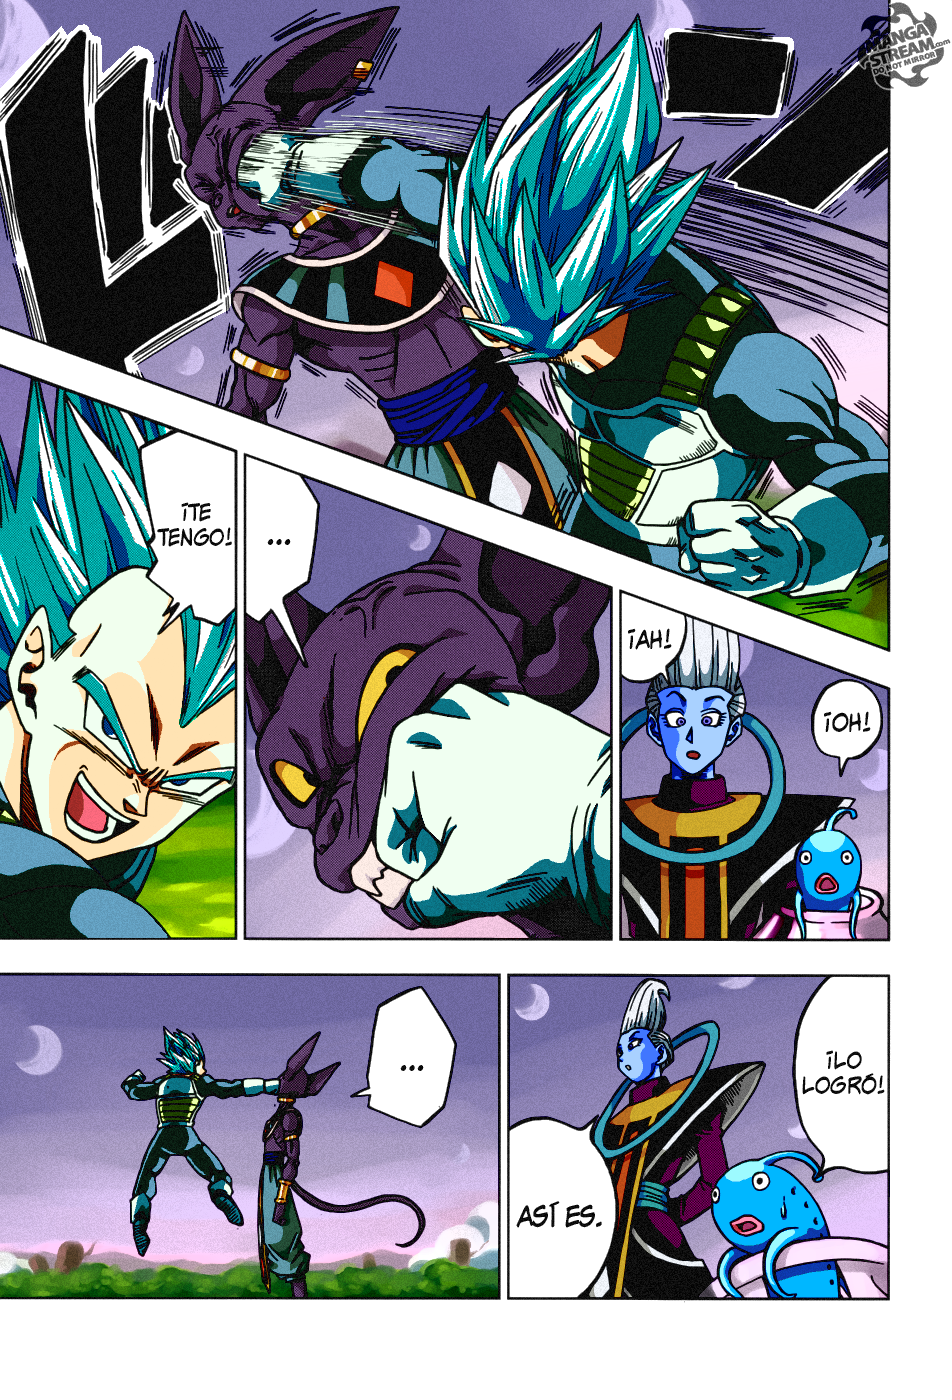 Dragon ball super manga 27 color (second page) by ...